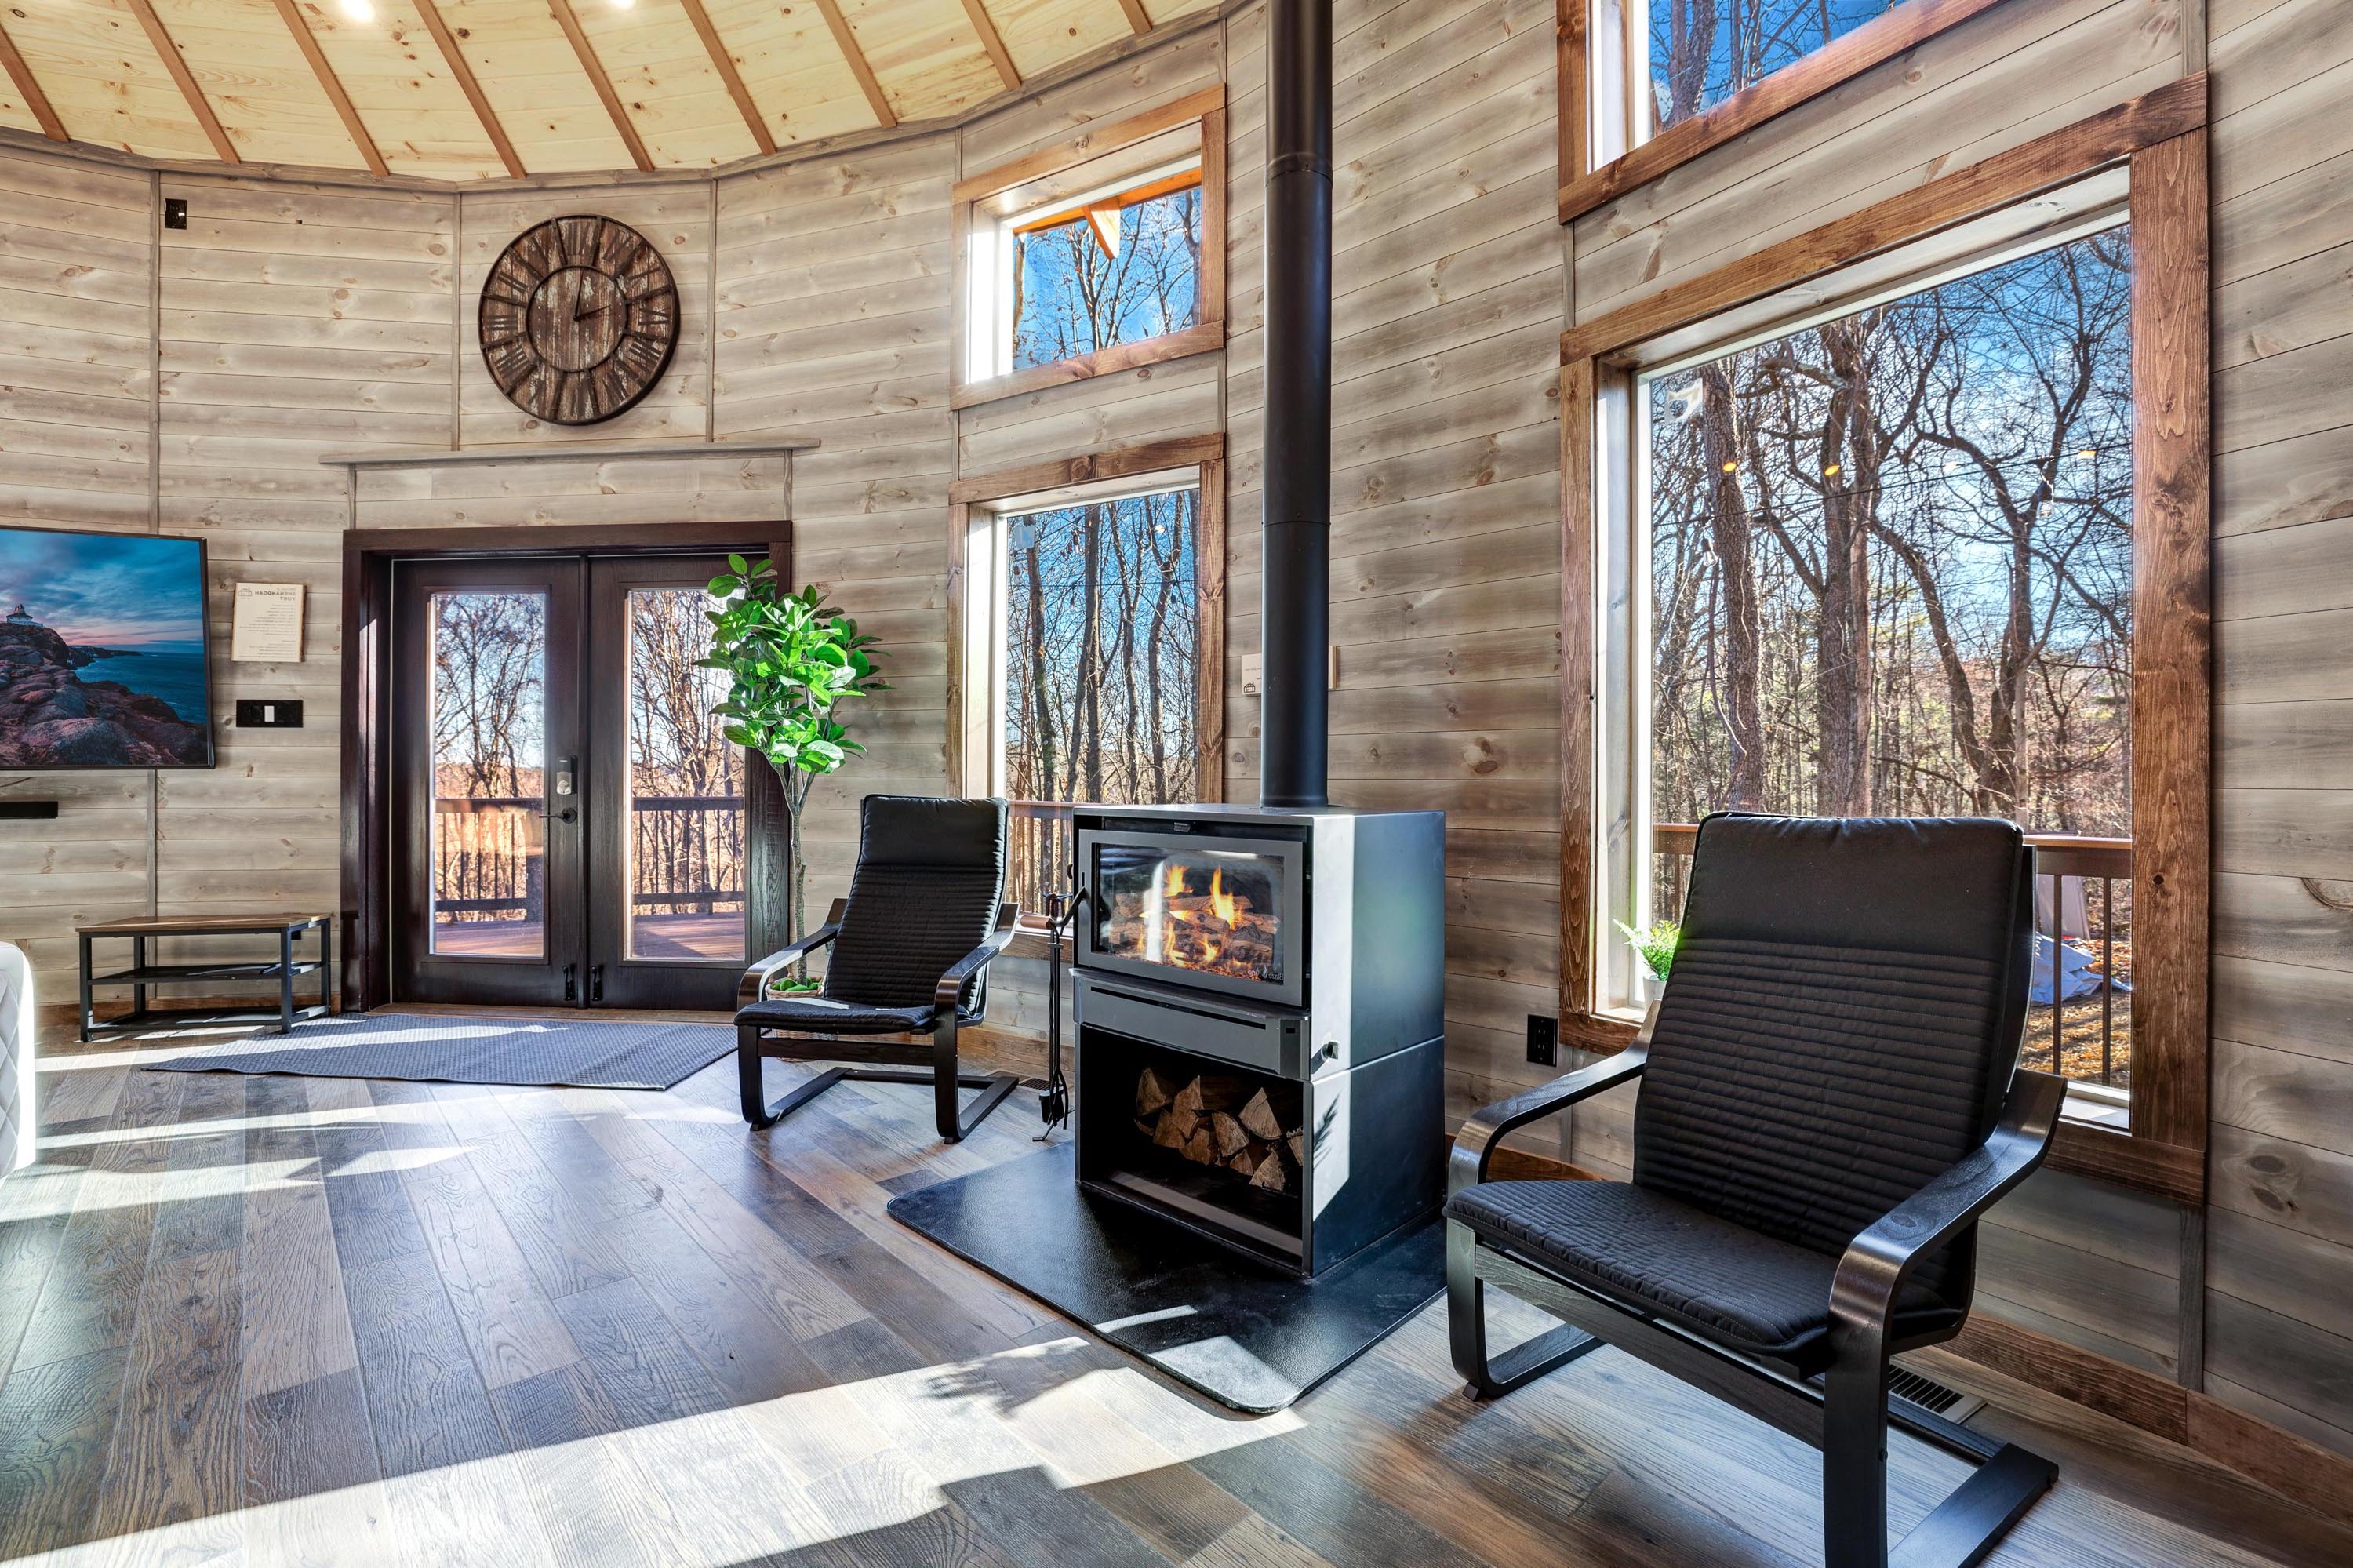 <span  class="uc_style_uc_tiles_grid_image_elementor_uc_items_attribute_title" style="color:#ffffff;">Two rocking chairs and a wood stove.</span>